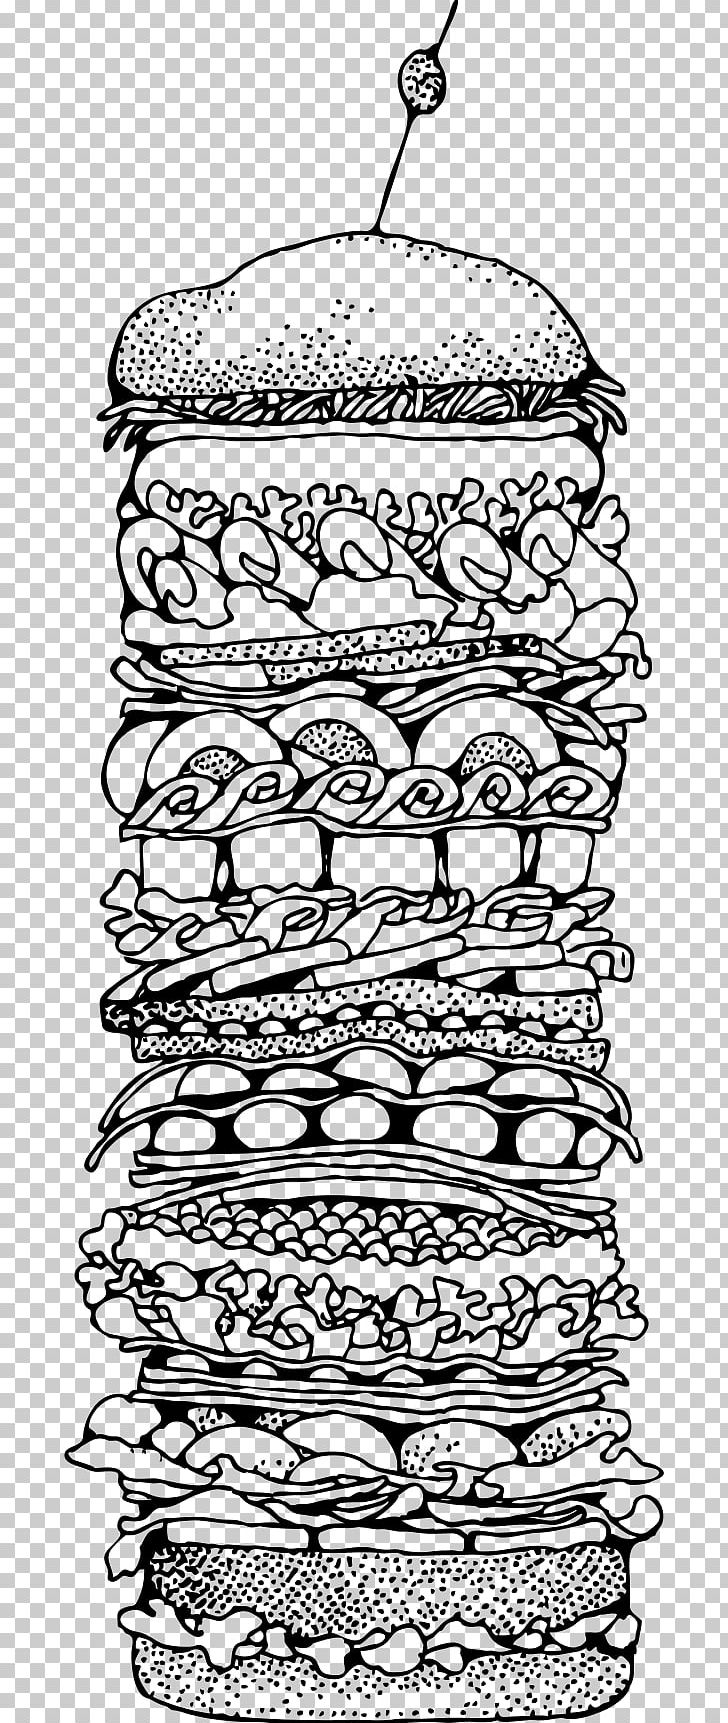 Peanut Butter And Jelly Sandwich Submarine Sandwich Hamburger French Fries Fast Food PNG, Clipart,  Free PNG Download